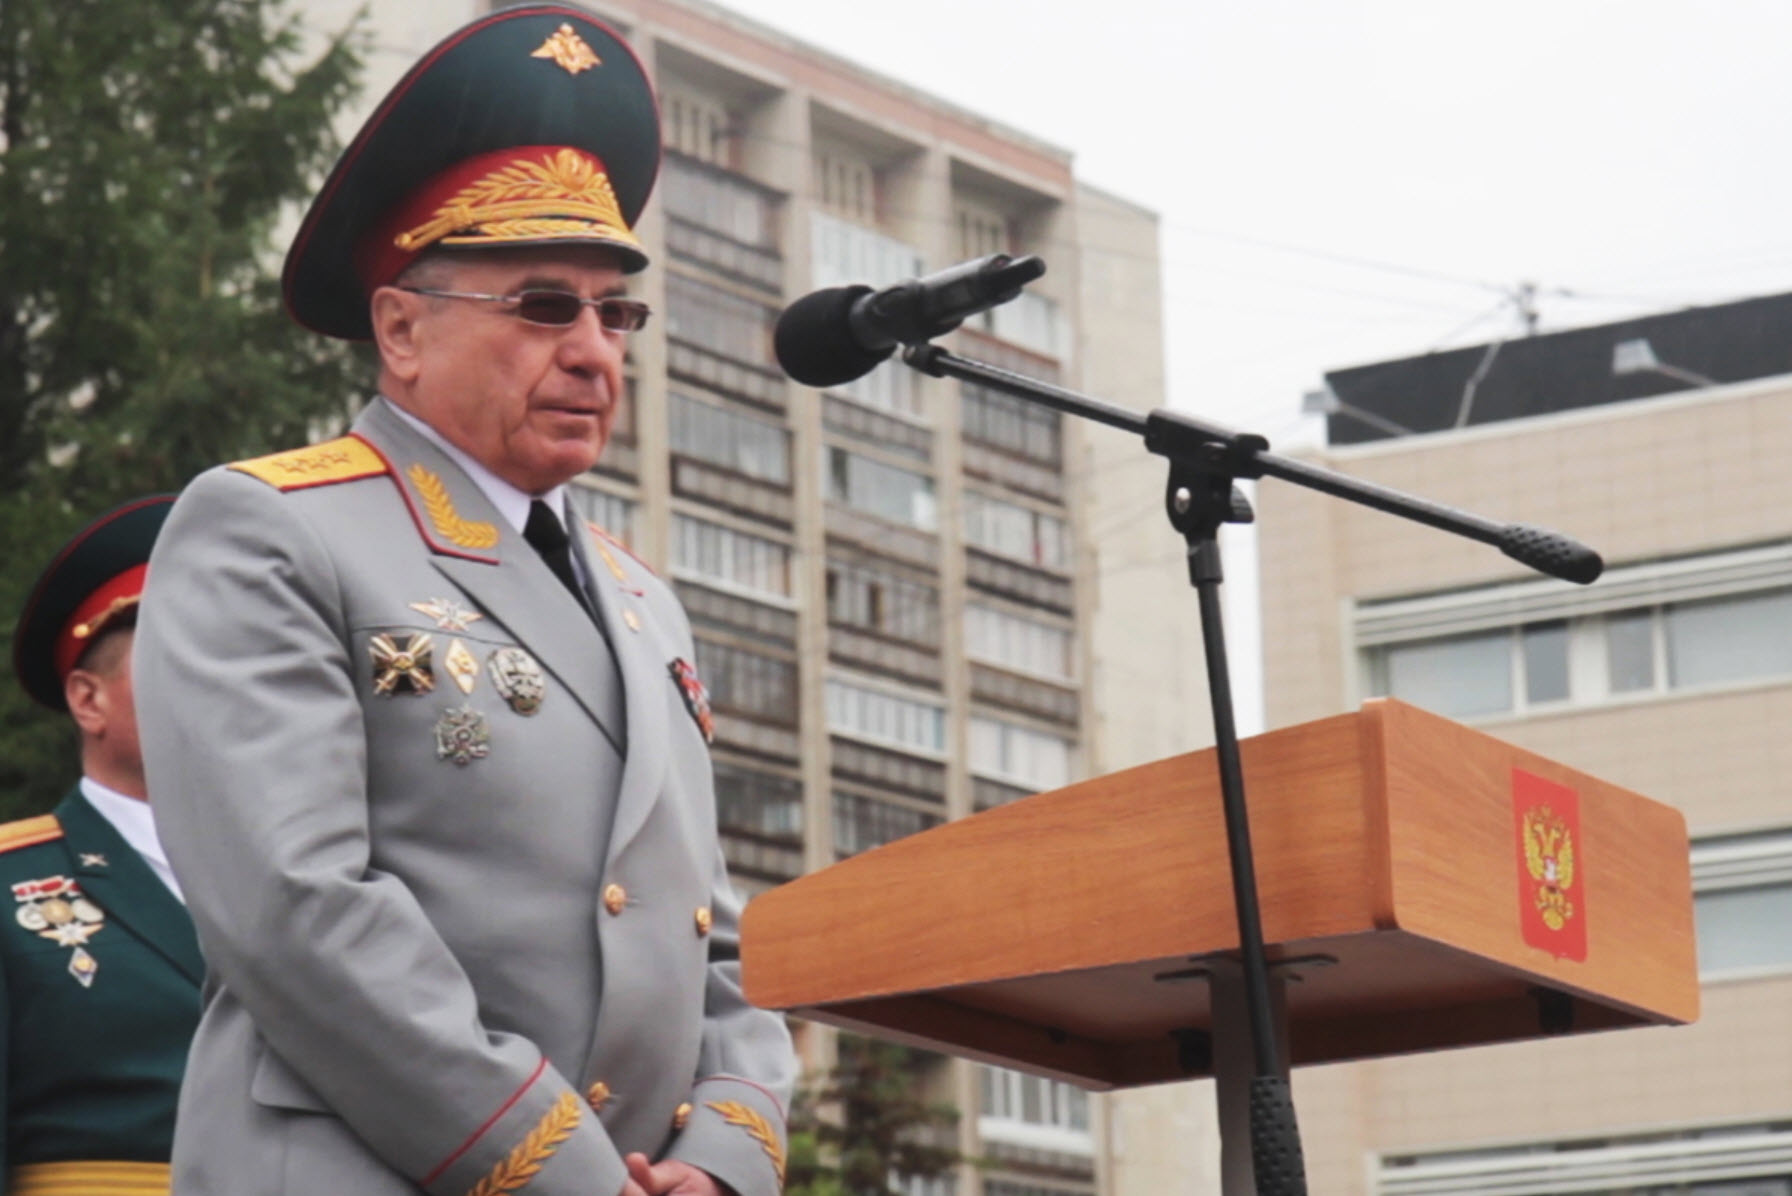 Bellingcat’s open source investigation alleges that this Russian Colonel General is the key figure in the downing of Malaysian Airways Flight MH17.